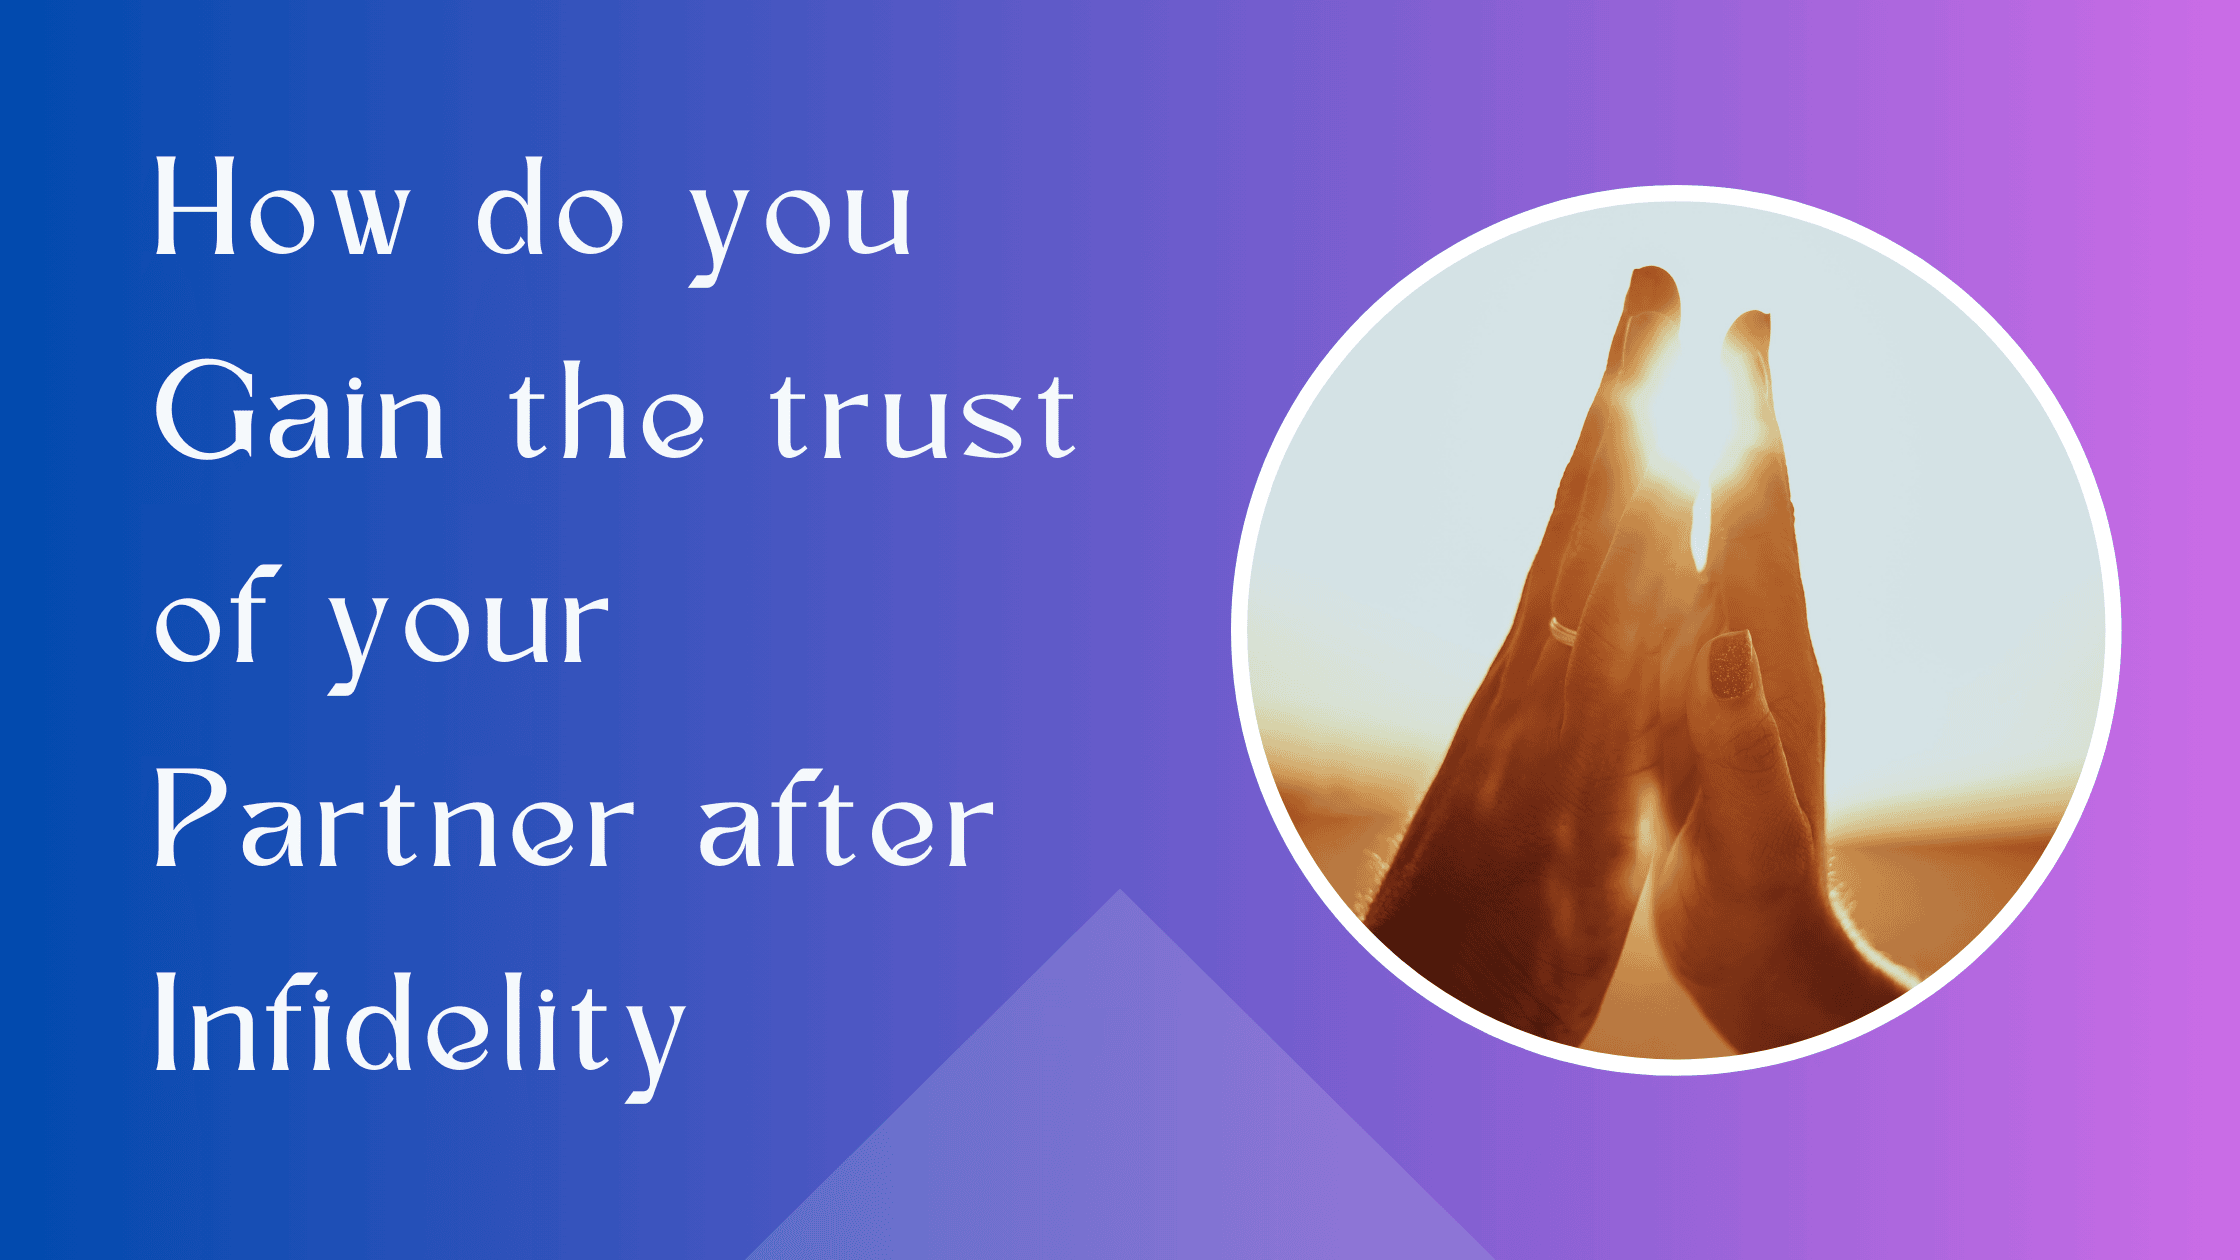 How do you gain the trust of your partner after infidelity?